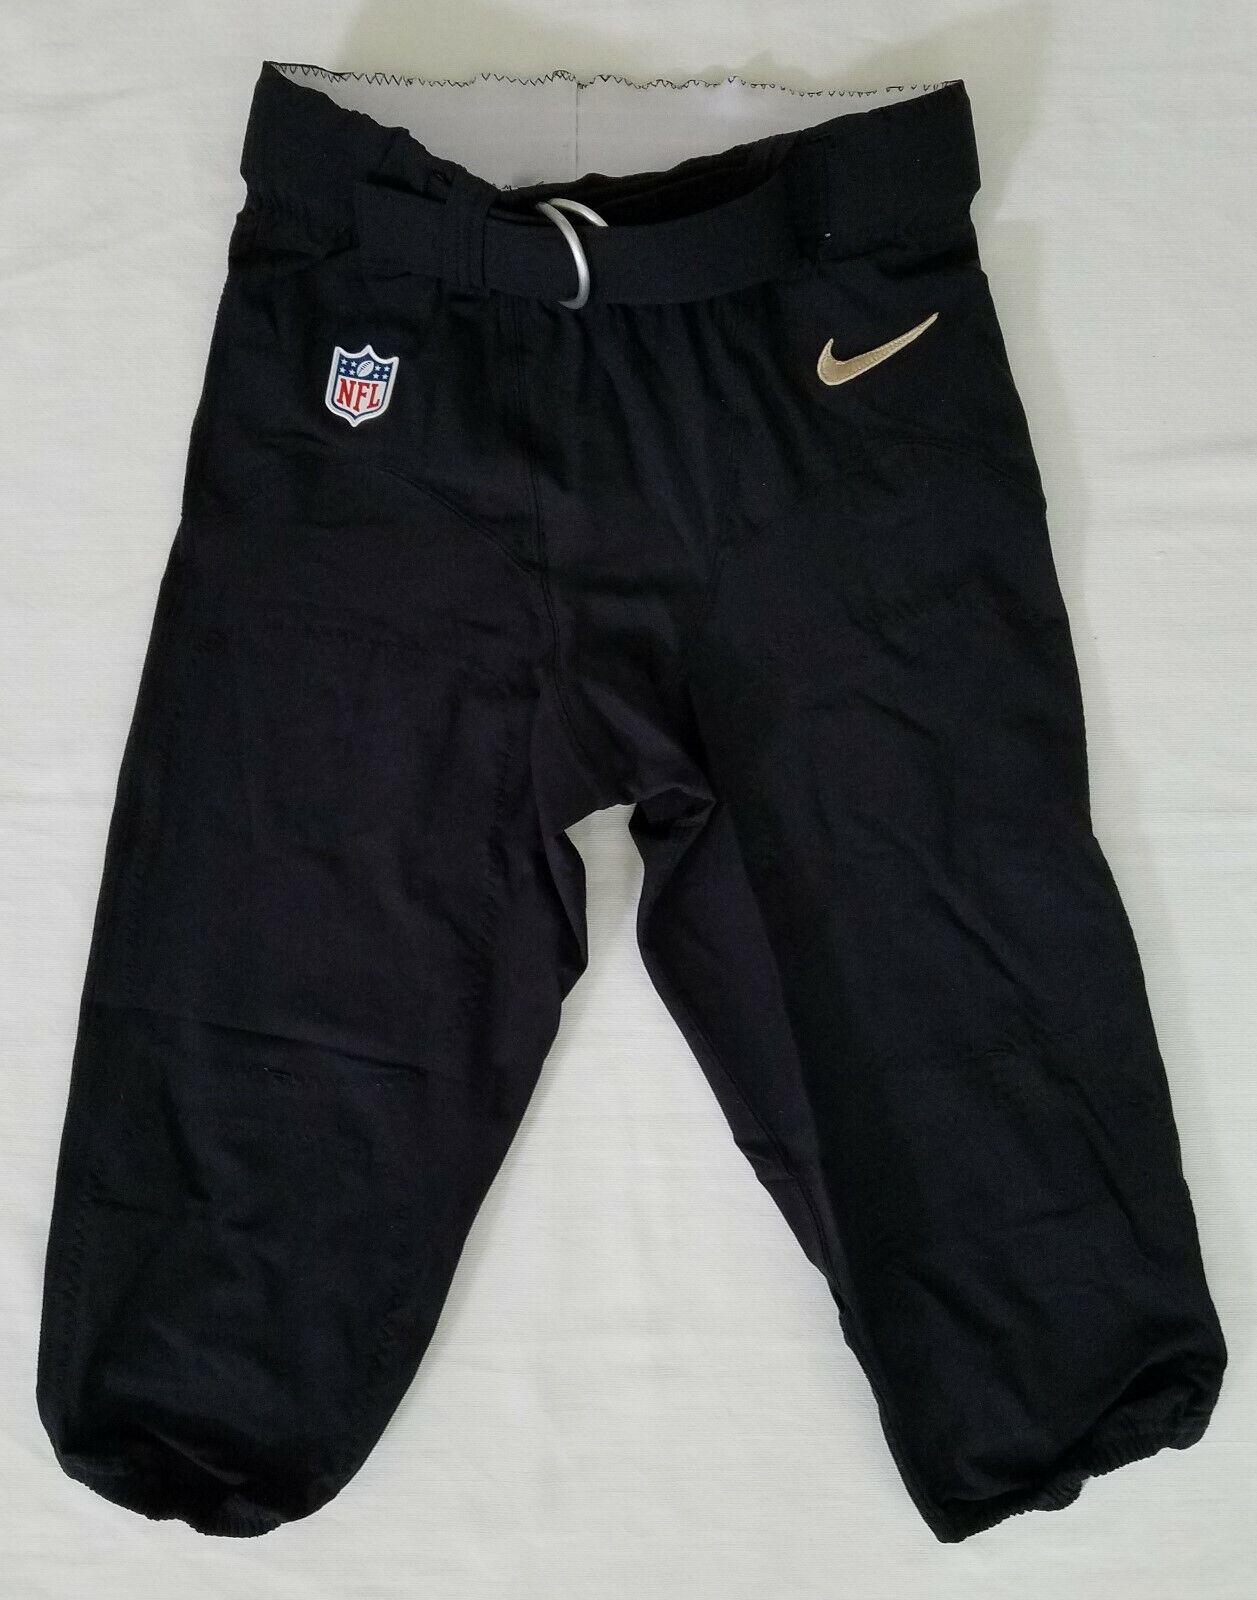 New Orleans Saints Nfl Game Issued Football Pants - Size 32 Long